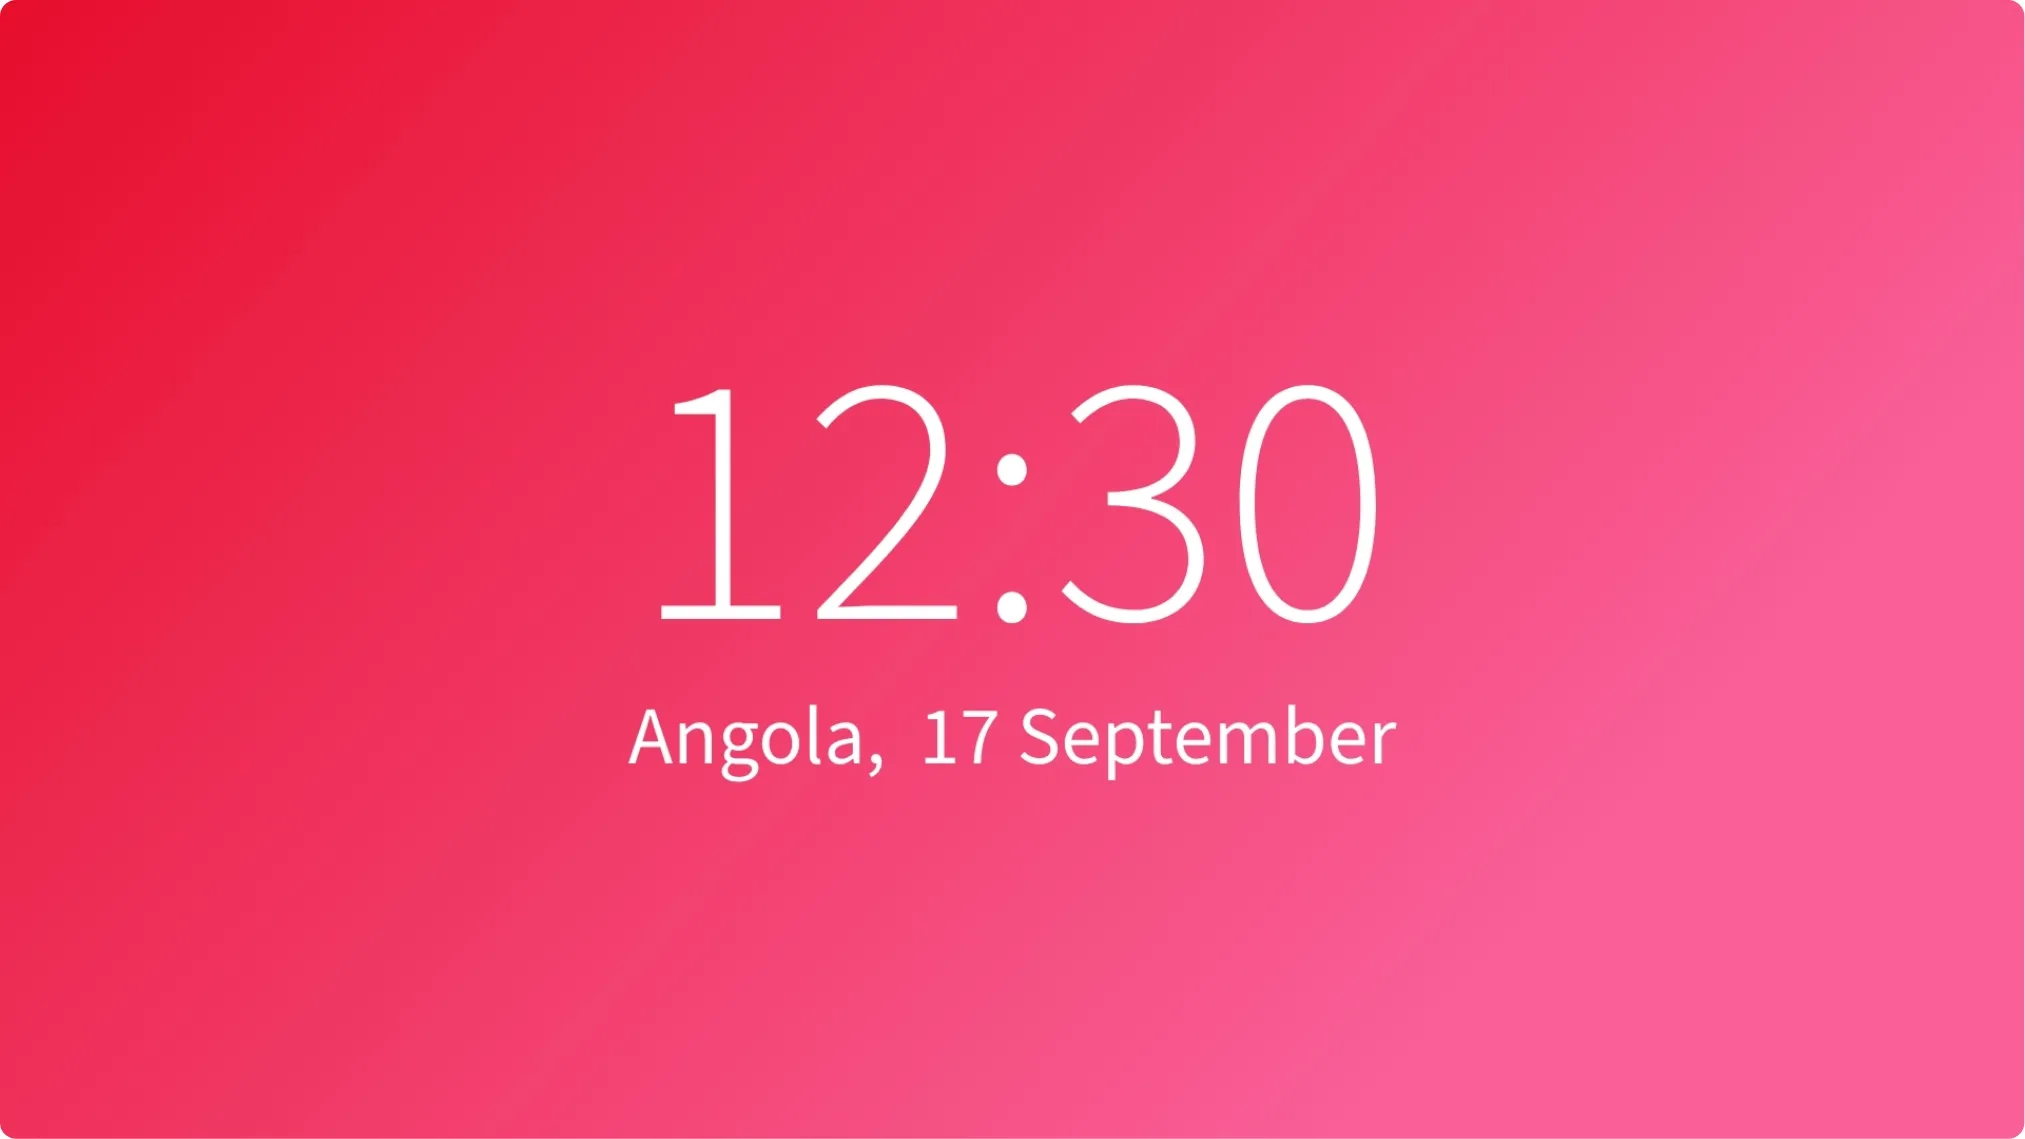 Clock app layout preview showing red gradient as background, digital clock format and Angola country.